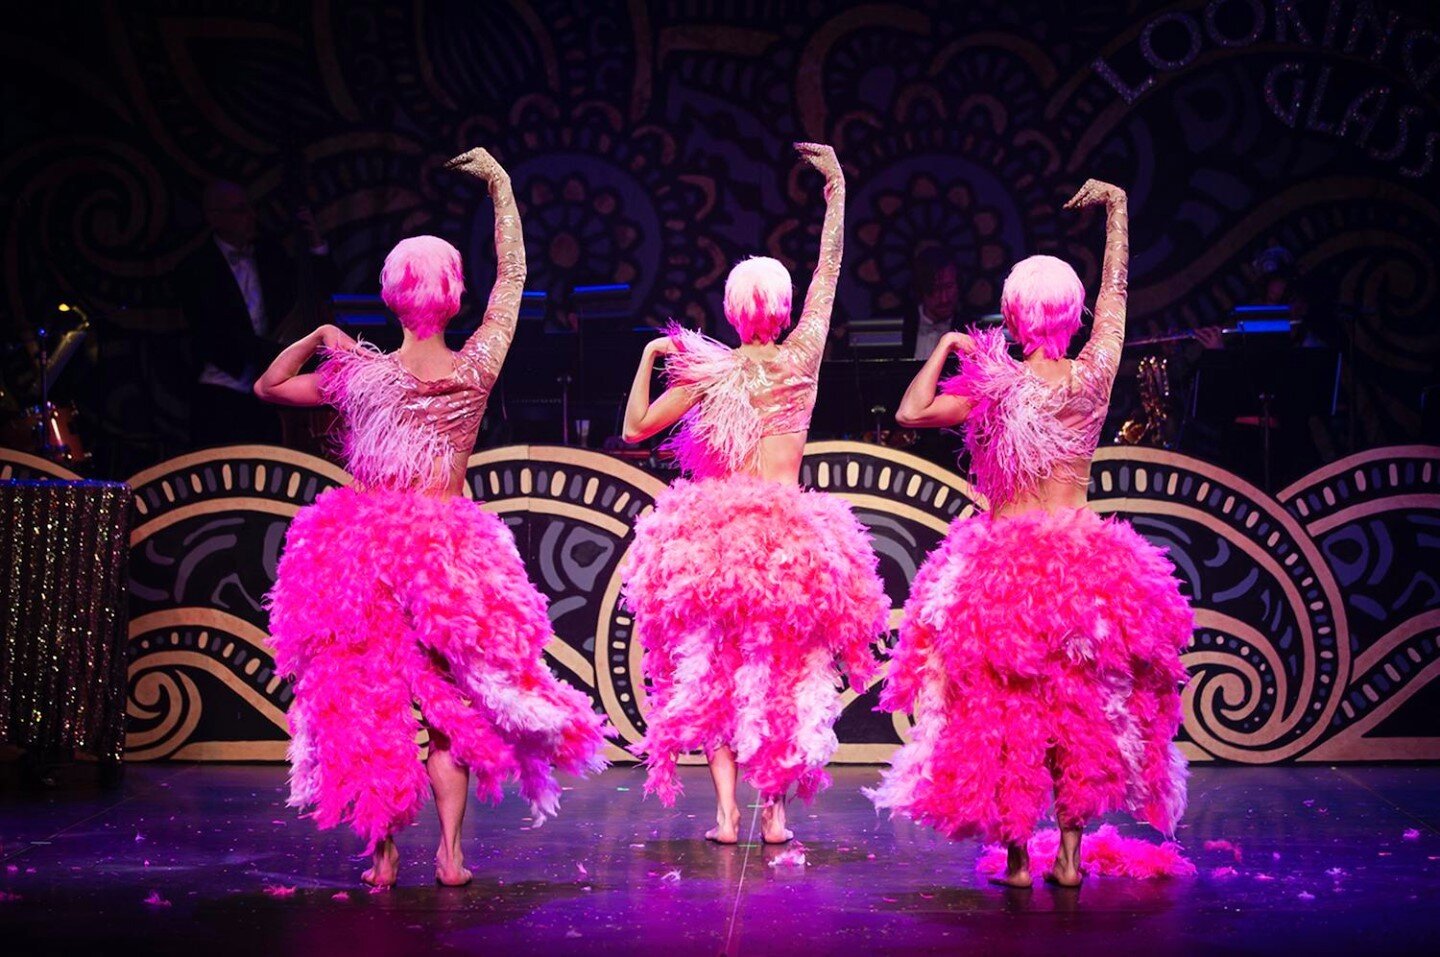 Flamingos make friends for life. Tag your flamingo friend!
.
.
.
#friend #burlesque #date #ladies #ladiesnight #flamingo #choreography #costume #beauty #friends #feathers #dance